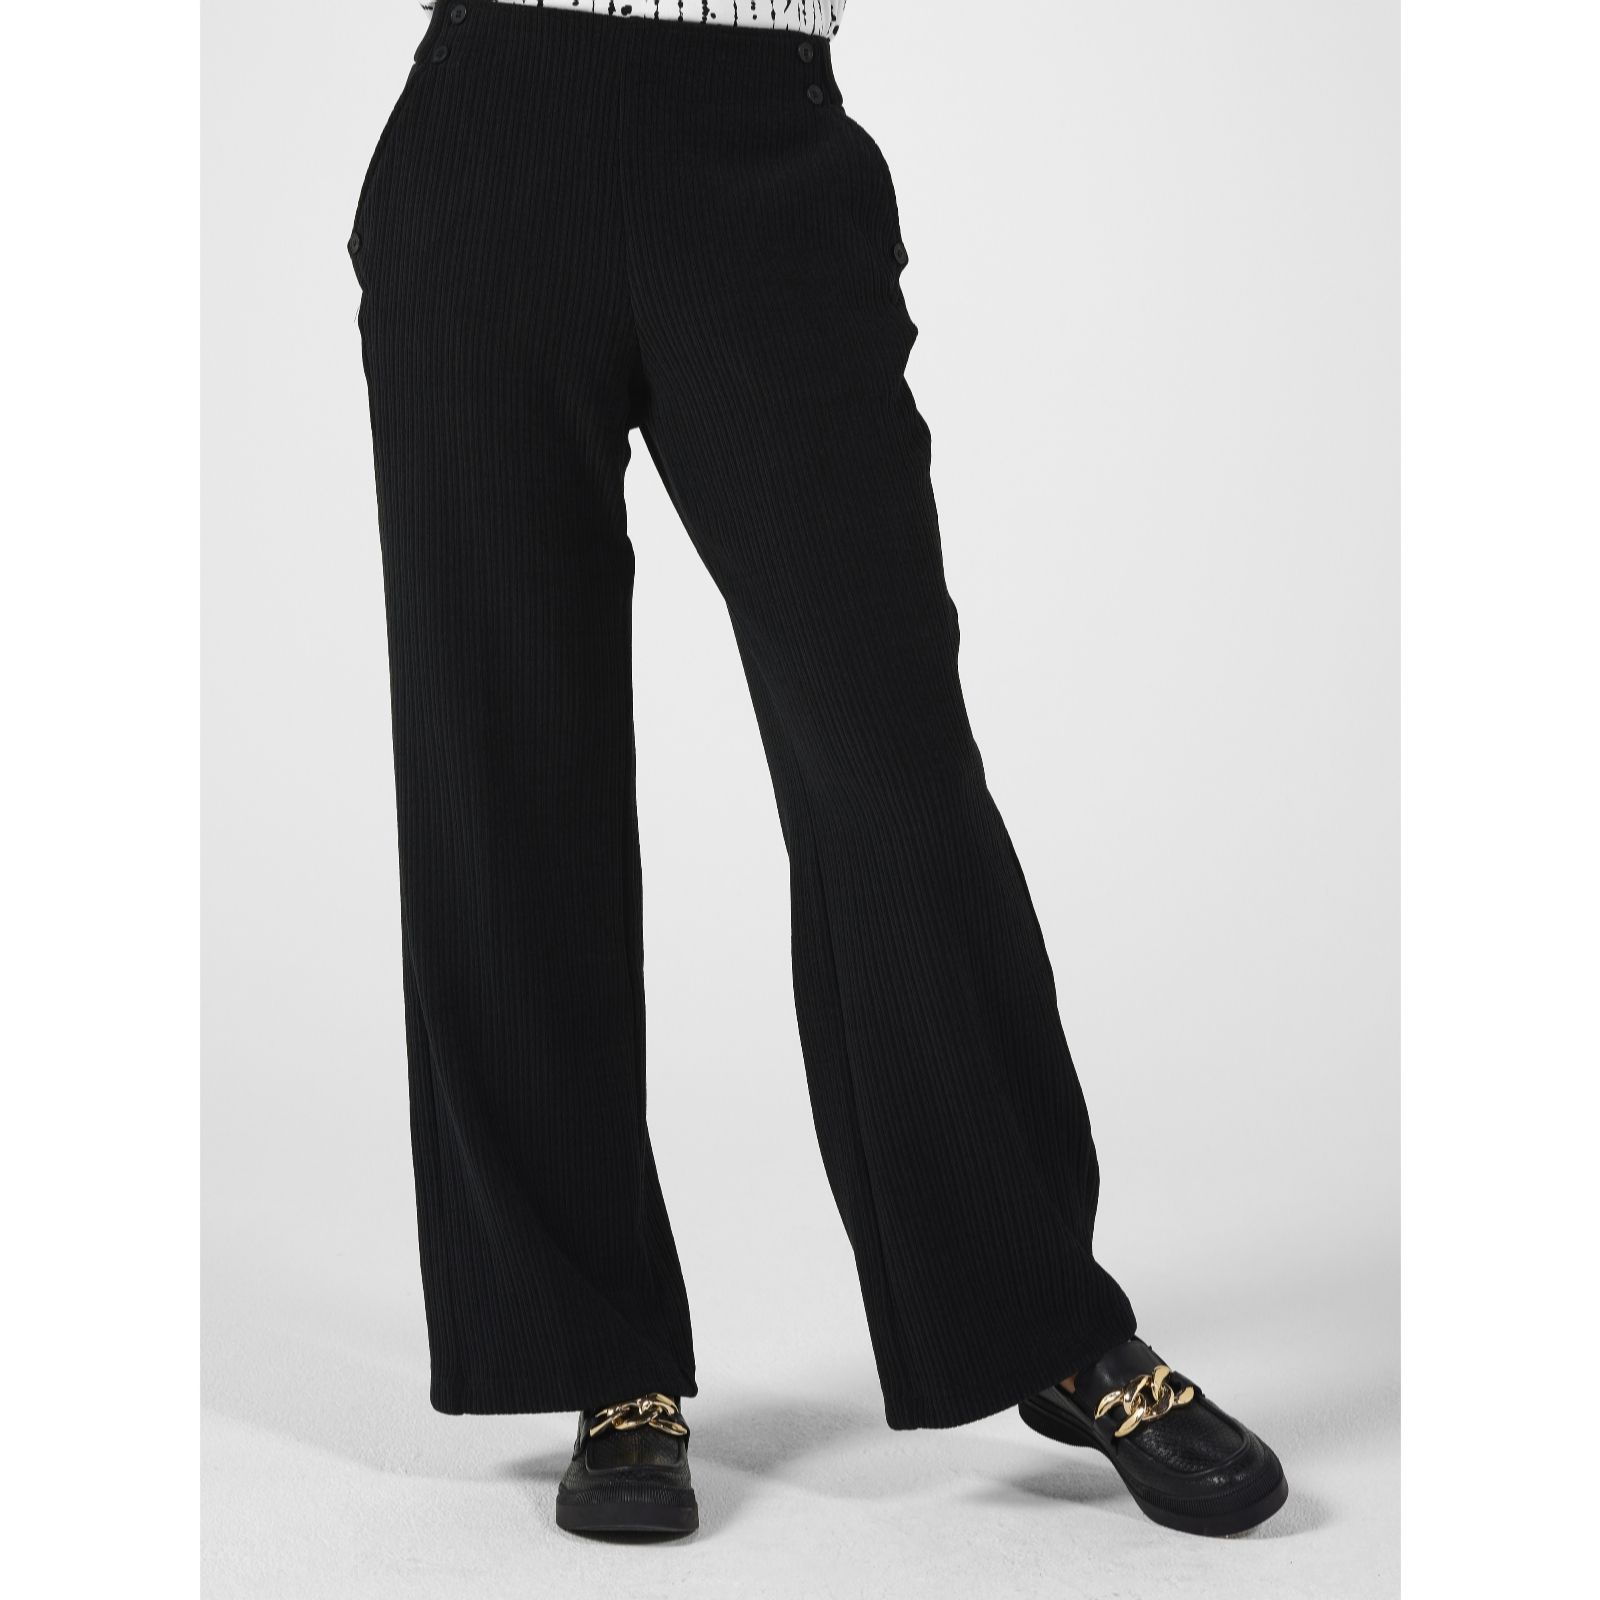 Clothing & Shoes - Bottoms - Pants - Wynne Layers Straight Leg Sailor Pant  - Online Shopping for Canadians